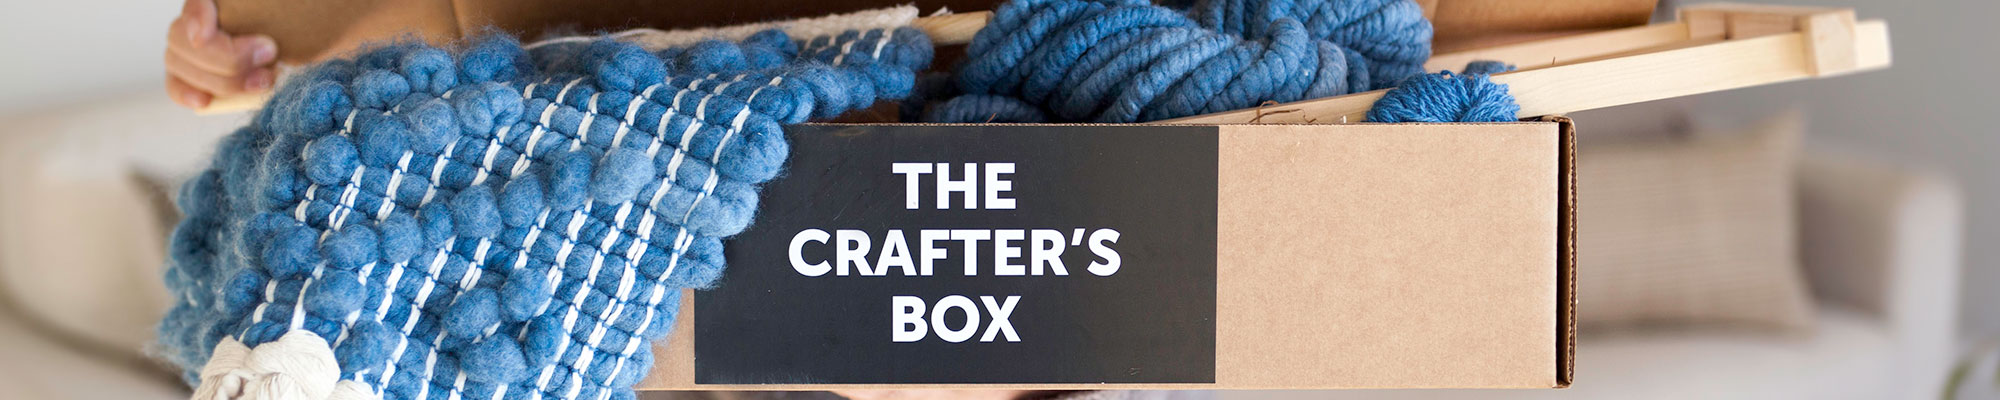 About Us | The Crafter's Box